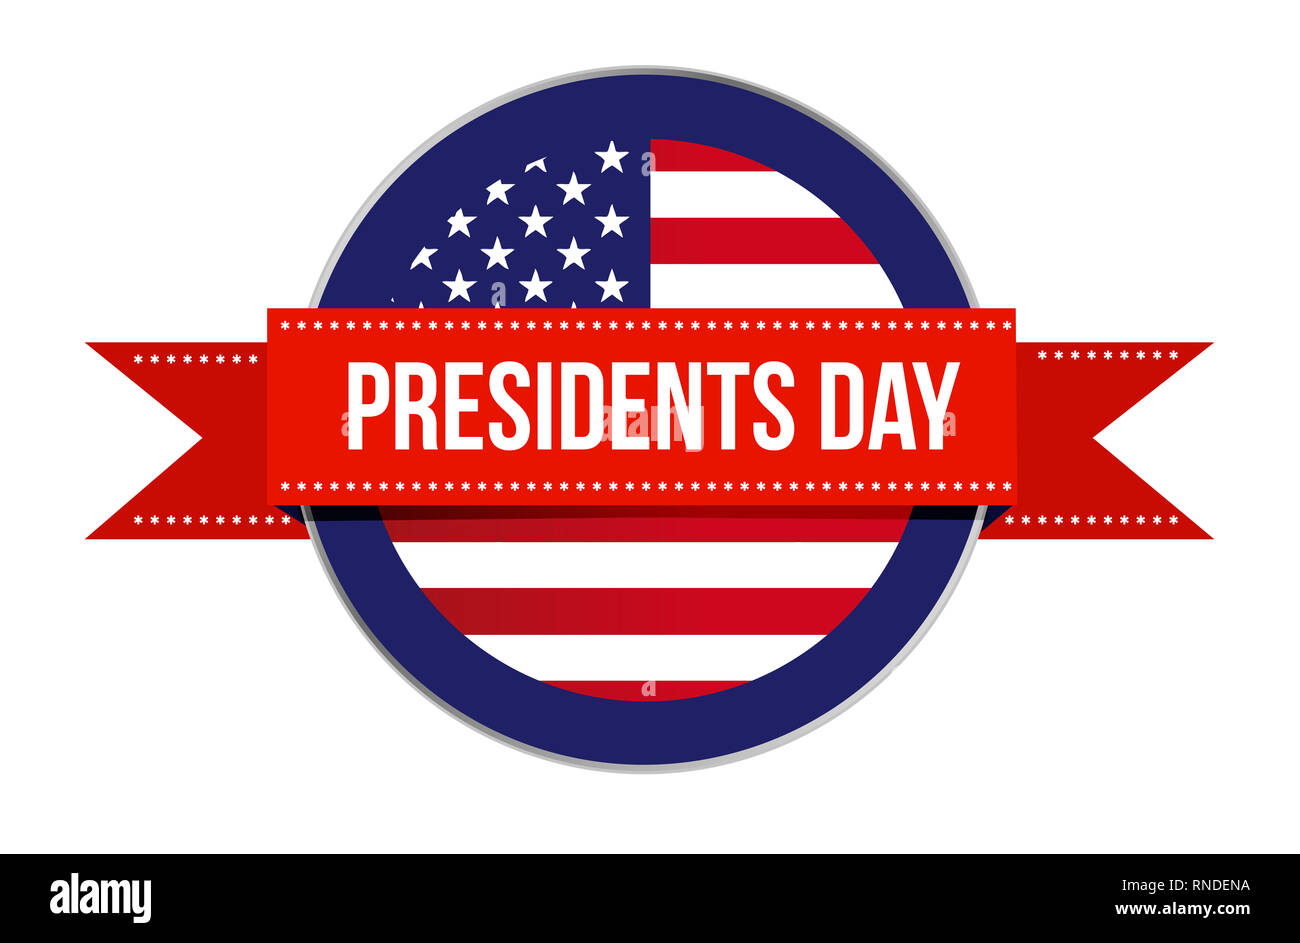 Presidents day US flag seal and ribbon icon illustration design isolated over white Stock Photo